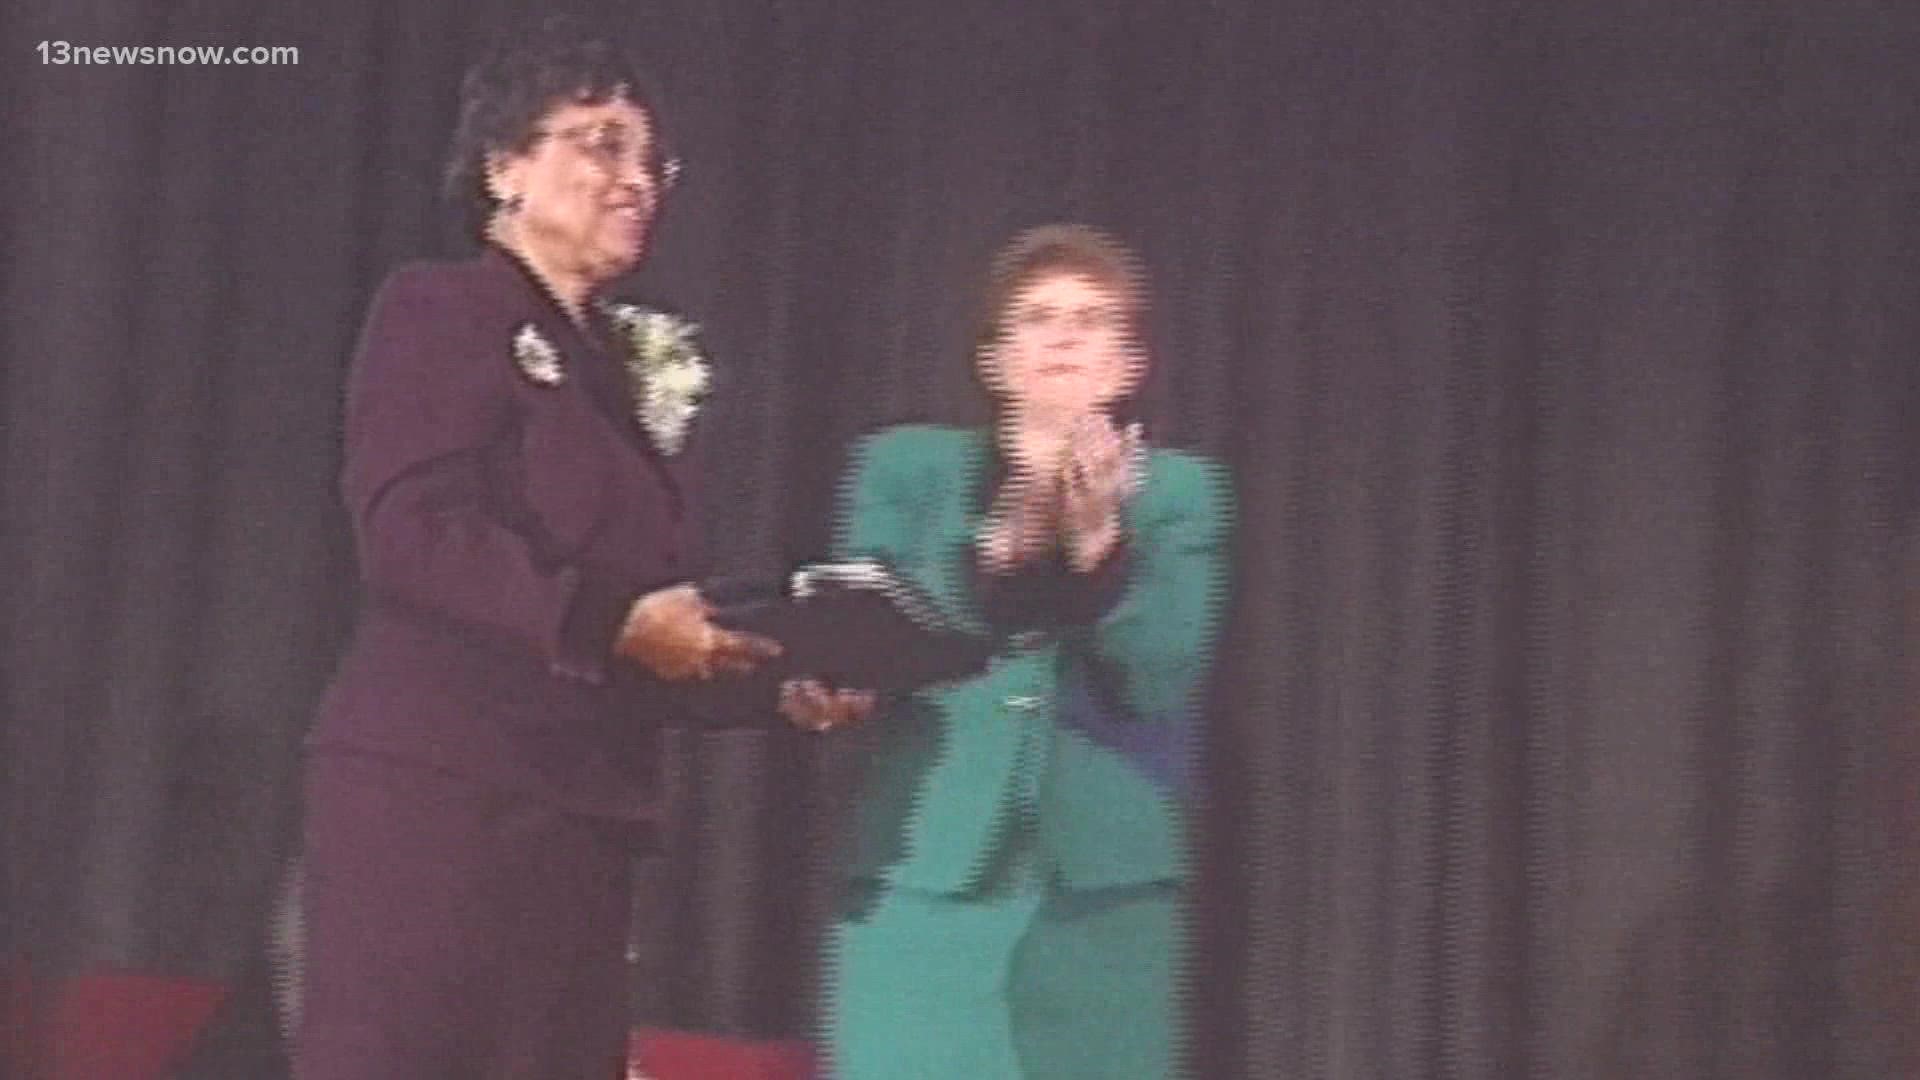 Flora Crittenden served the House of Delegates' 95th District from 1993 to 2004. Before that, she was a teacher in Newport News for over 30 years.